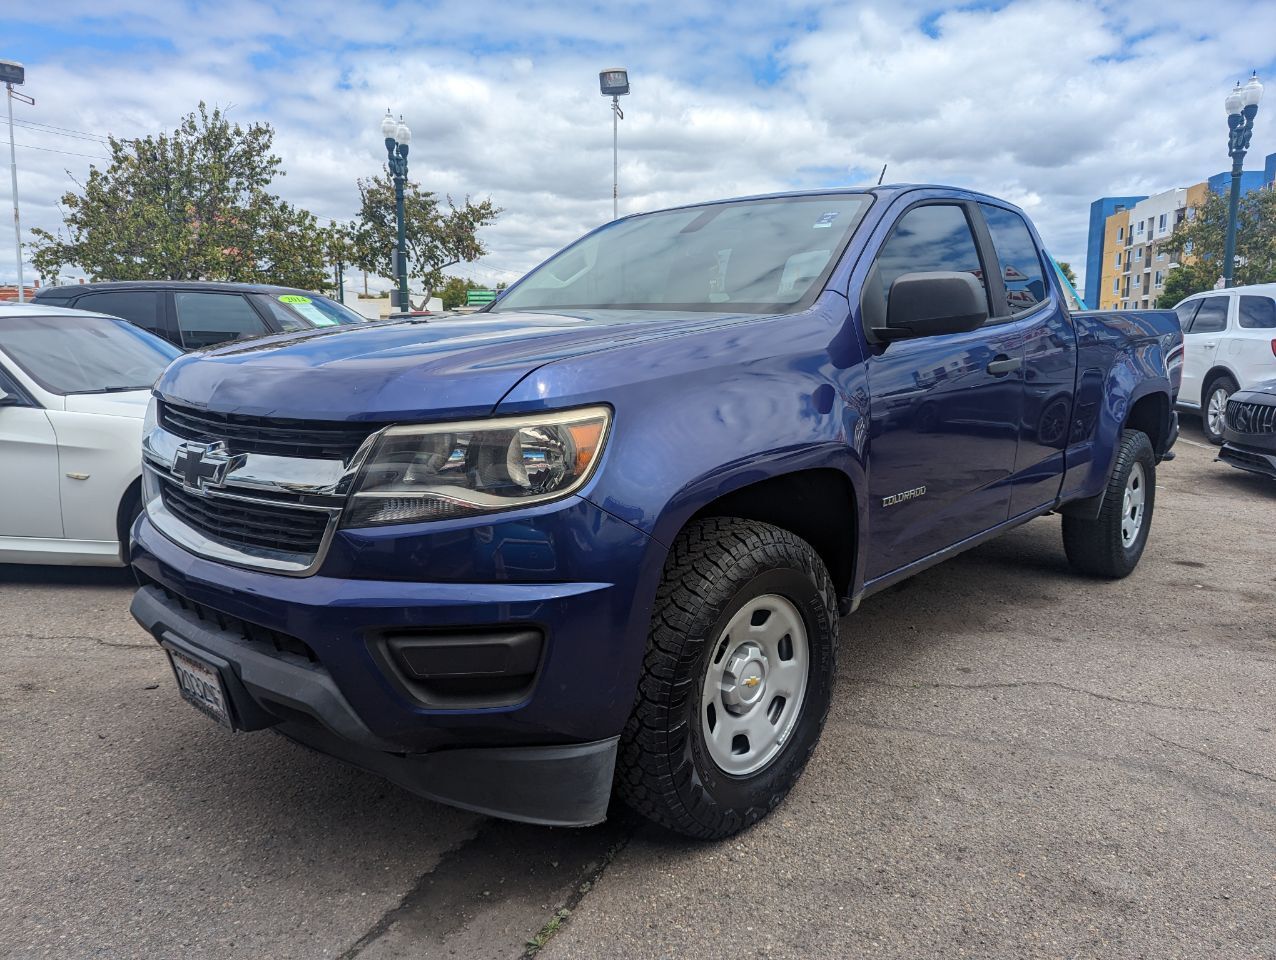 2016 Chevrolet Colorado Work Truck Extended Cab LB RWD